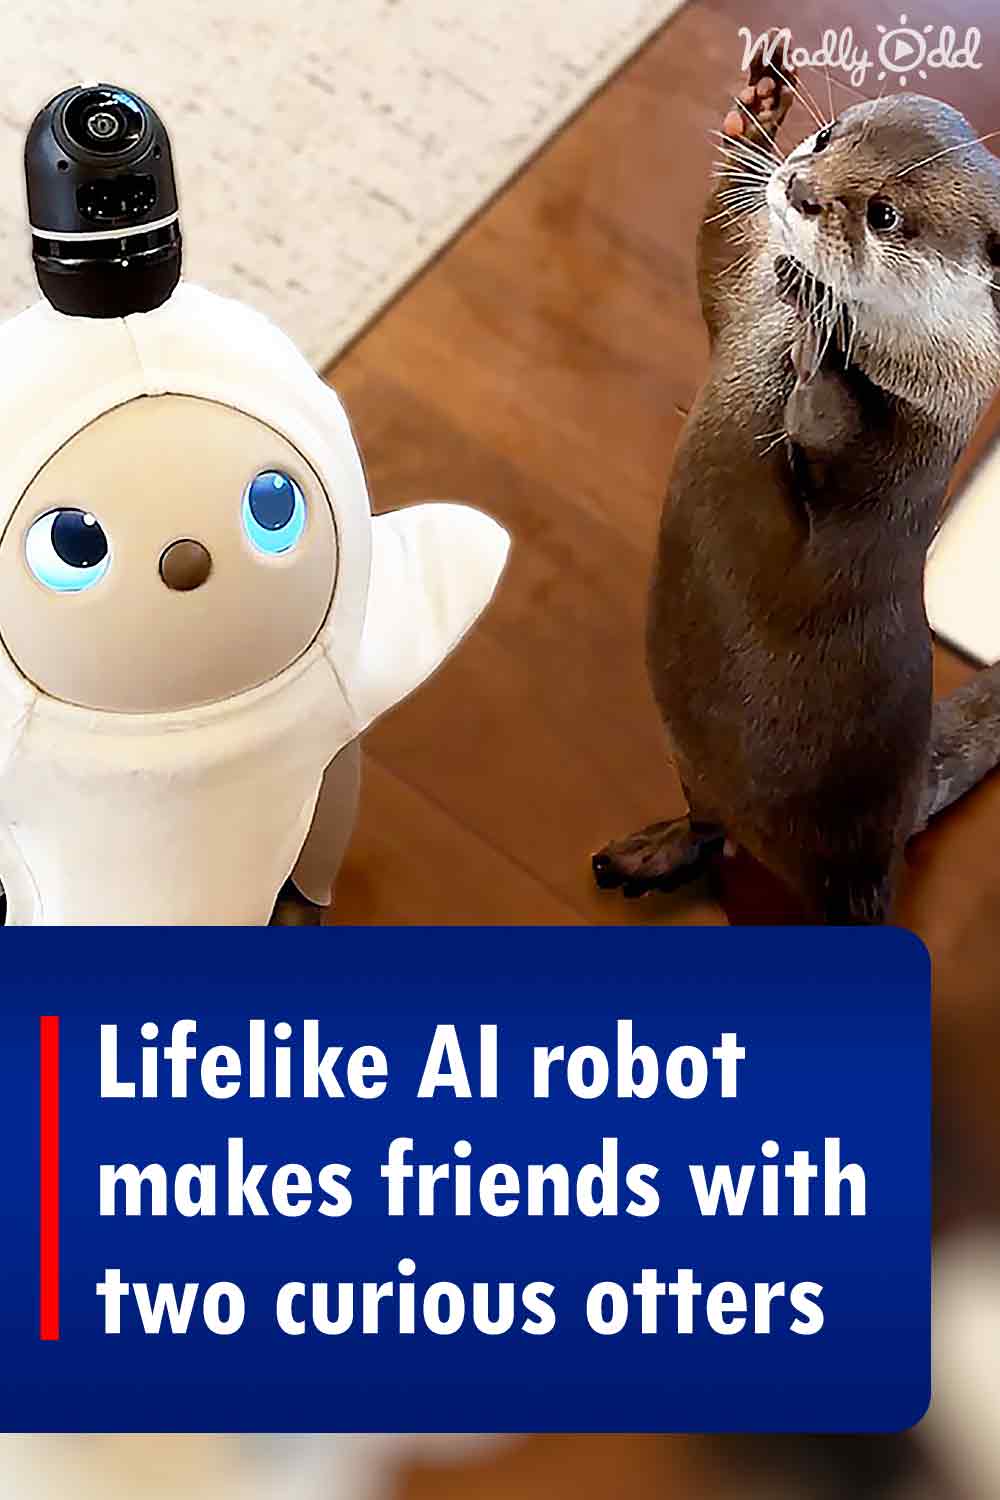 Lifelike AI robot makes friends with two curious otters